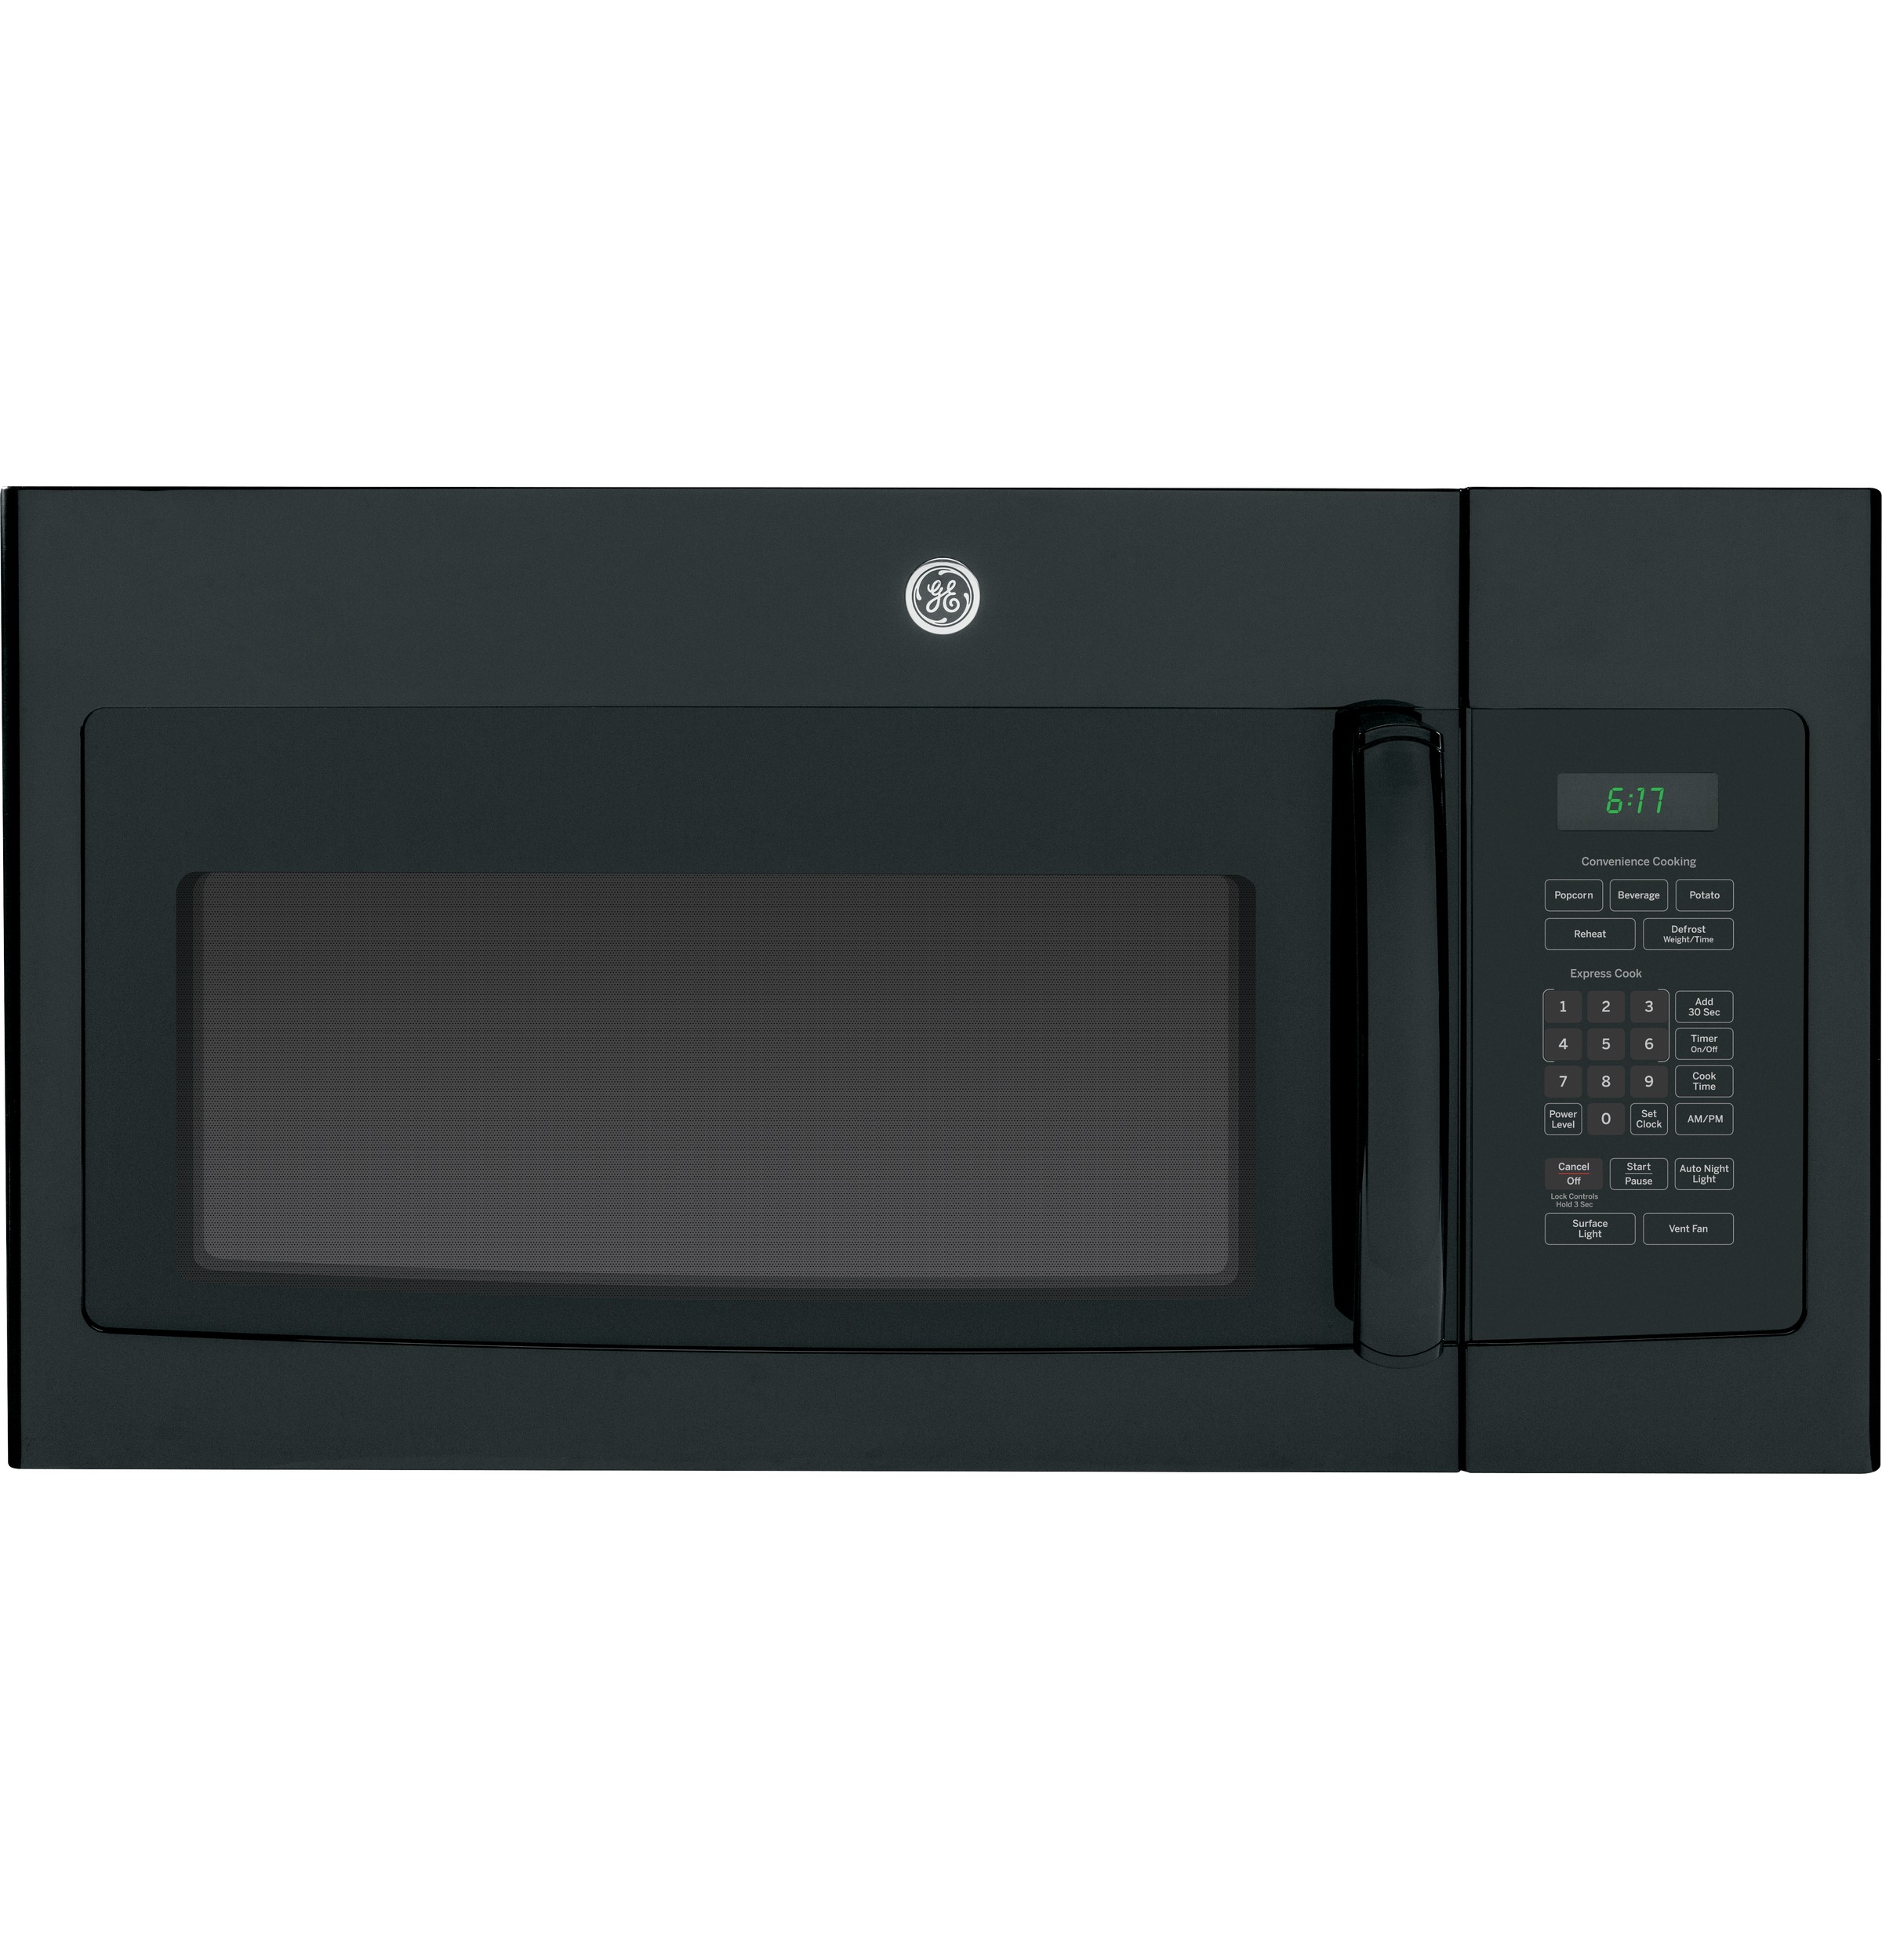 GE® 1.7 Cu. Ft. Over-the-Range Microwave Oven with Recirculating Venting